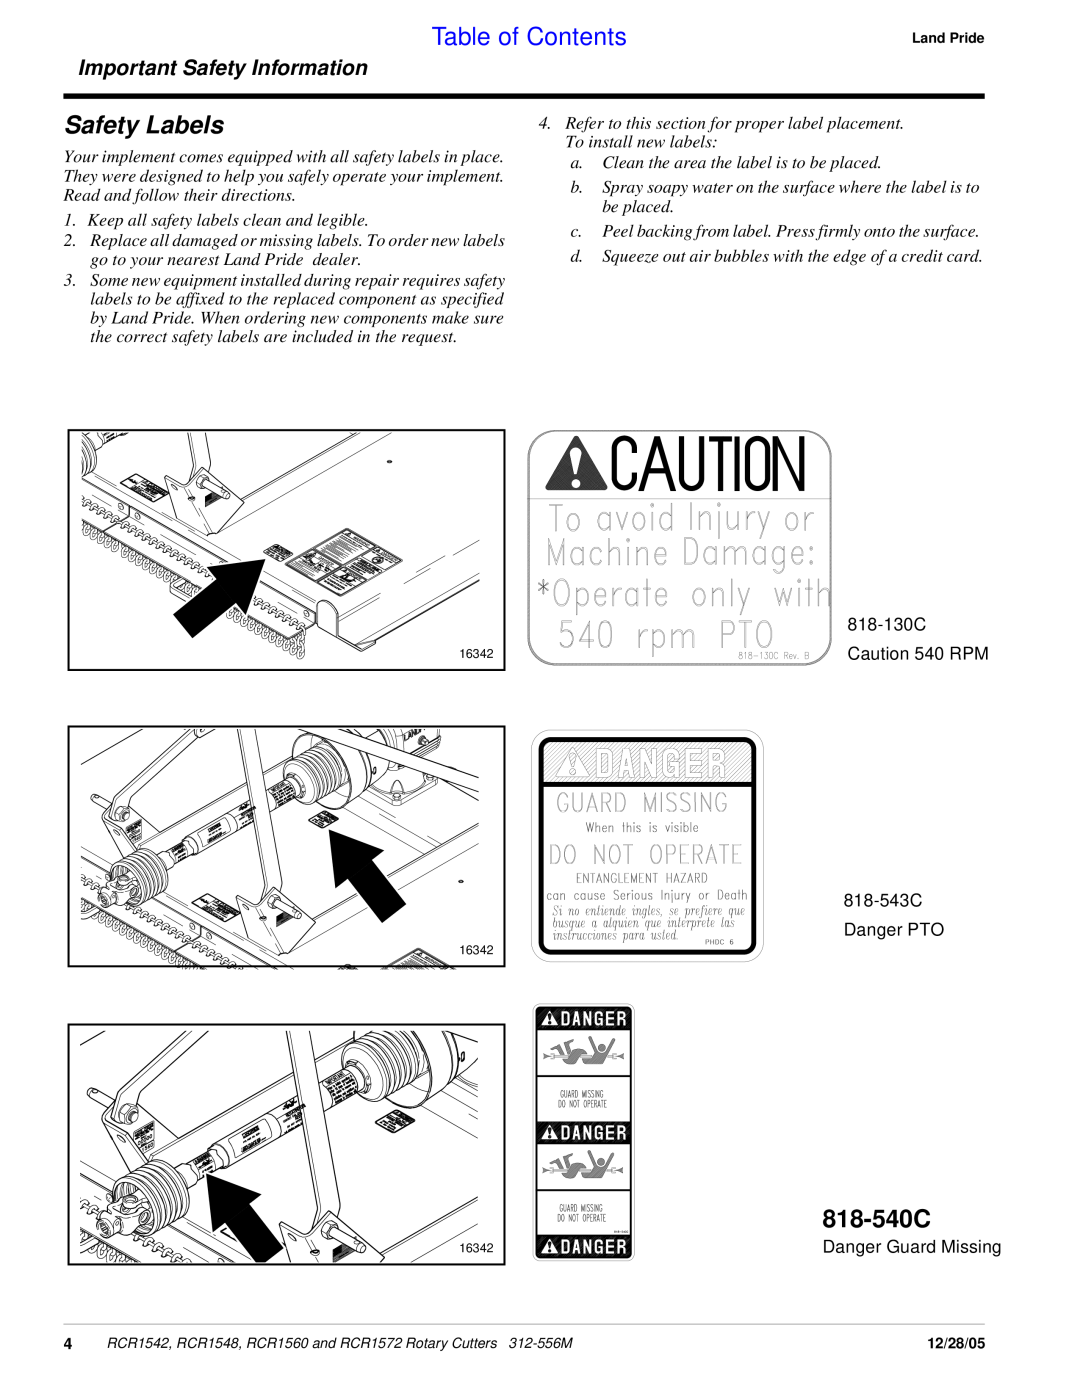 Land Pride RCR1542, RCR1560, RCR1572, RCR1548 manual Safety Labels, 818-540C, Table of Contents, Important Safety Information 